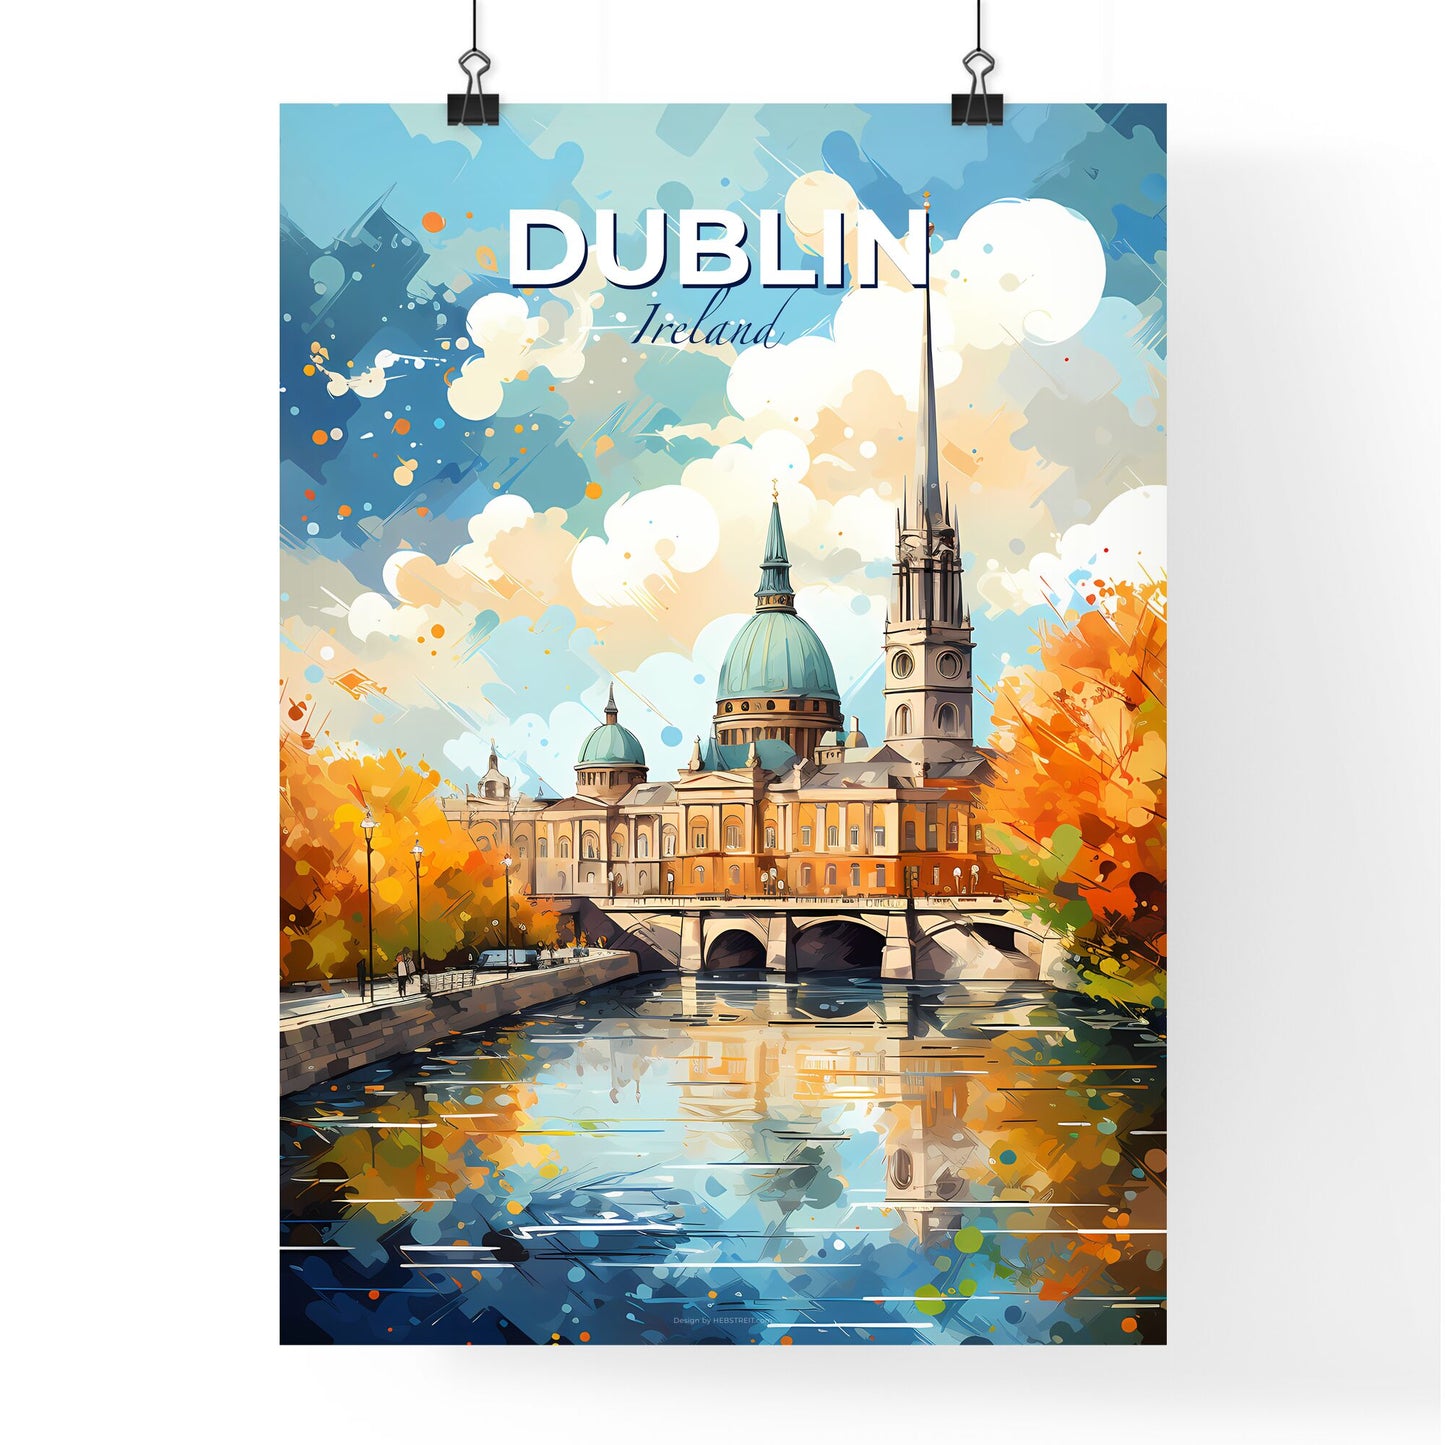 Dublin Ireland Skyline - A Water Canal With A Building And Trees - Customizable Travel Gift Default Title